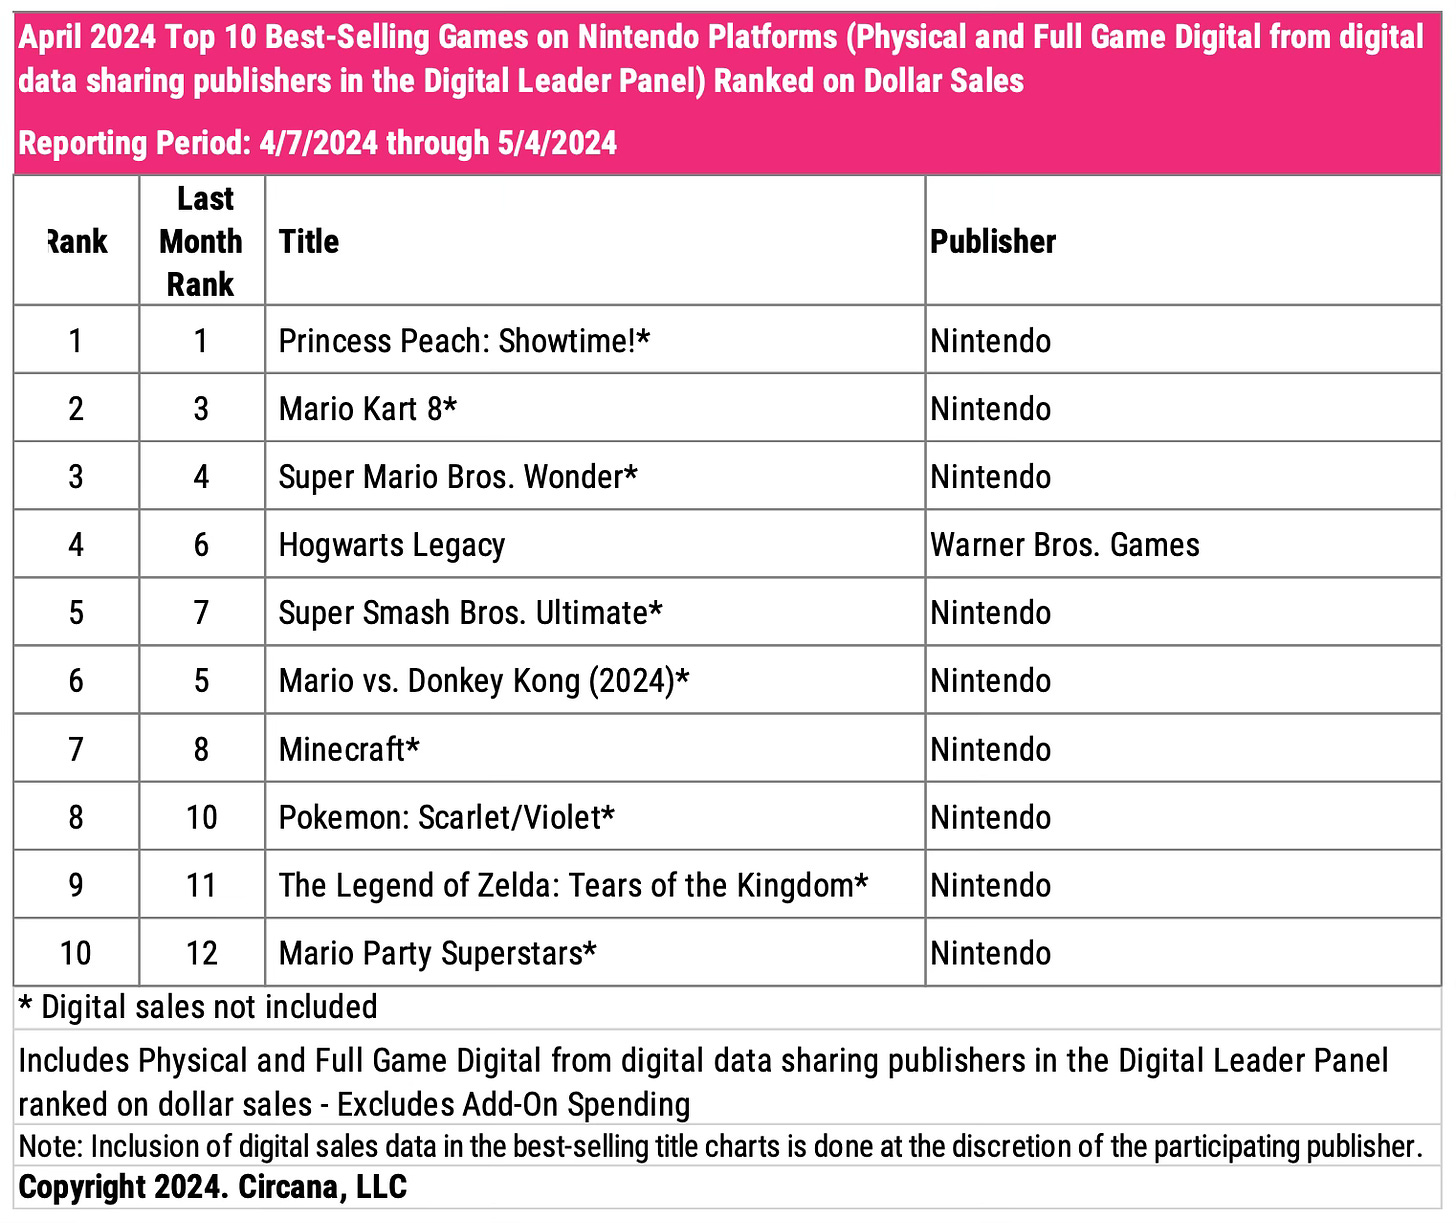 Chart showing the top 10 best-selling games on Nintendo platforms in April 2024